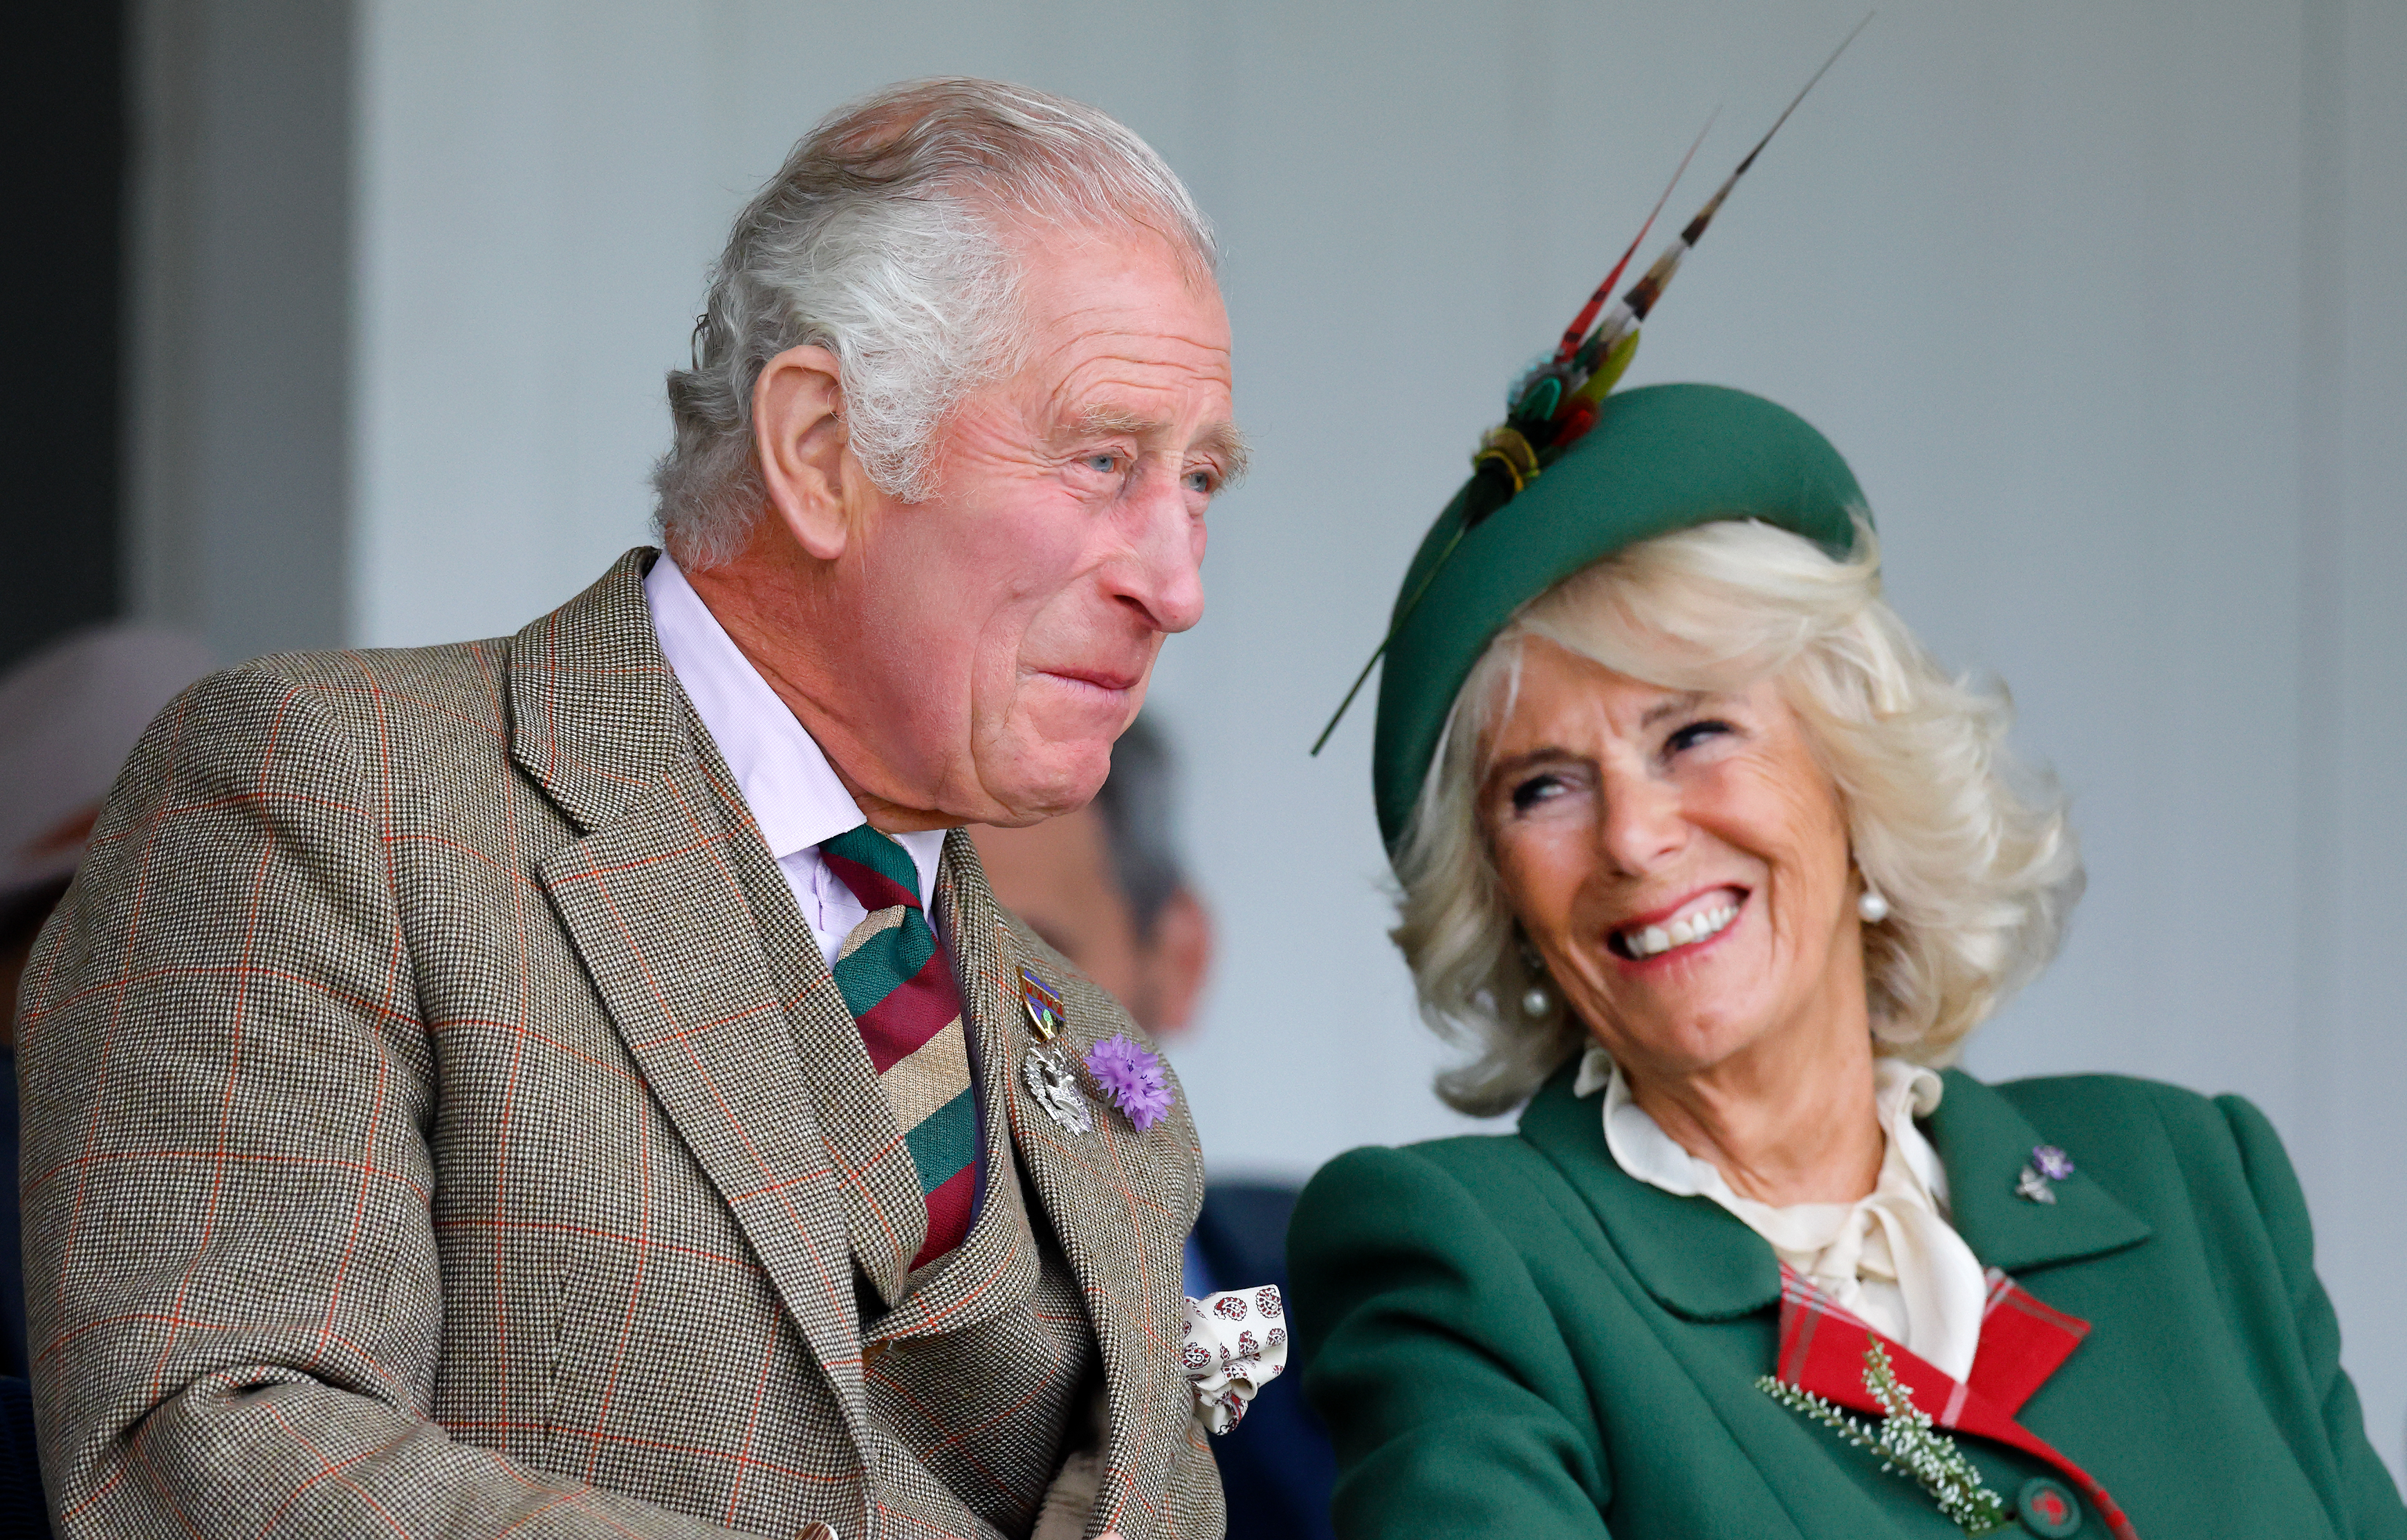 Prince Charles, Prince of Wales and Camilla, Duchess of Cornwall attend the Braemar Highland Gathering in Braemar, Scotland, on September 3, 2022. | Source: Getty Images